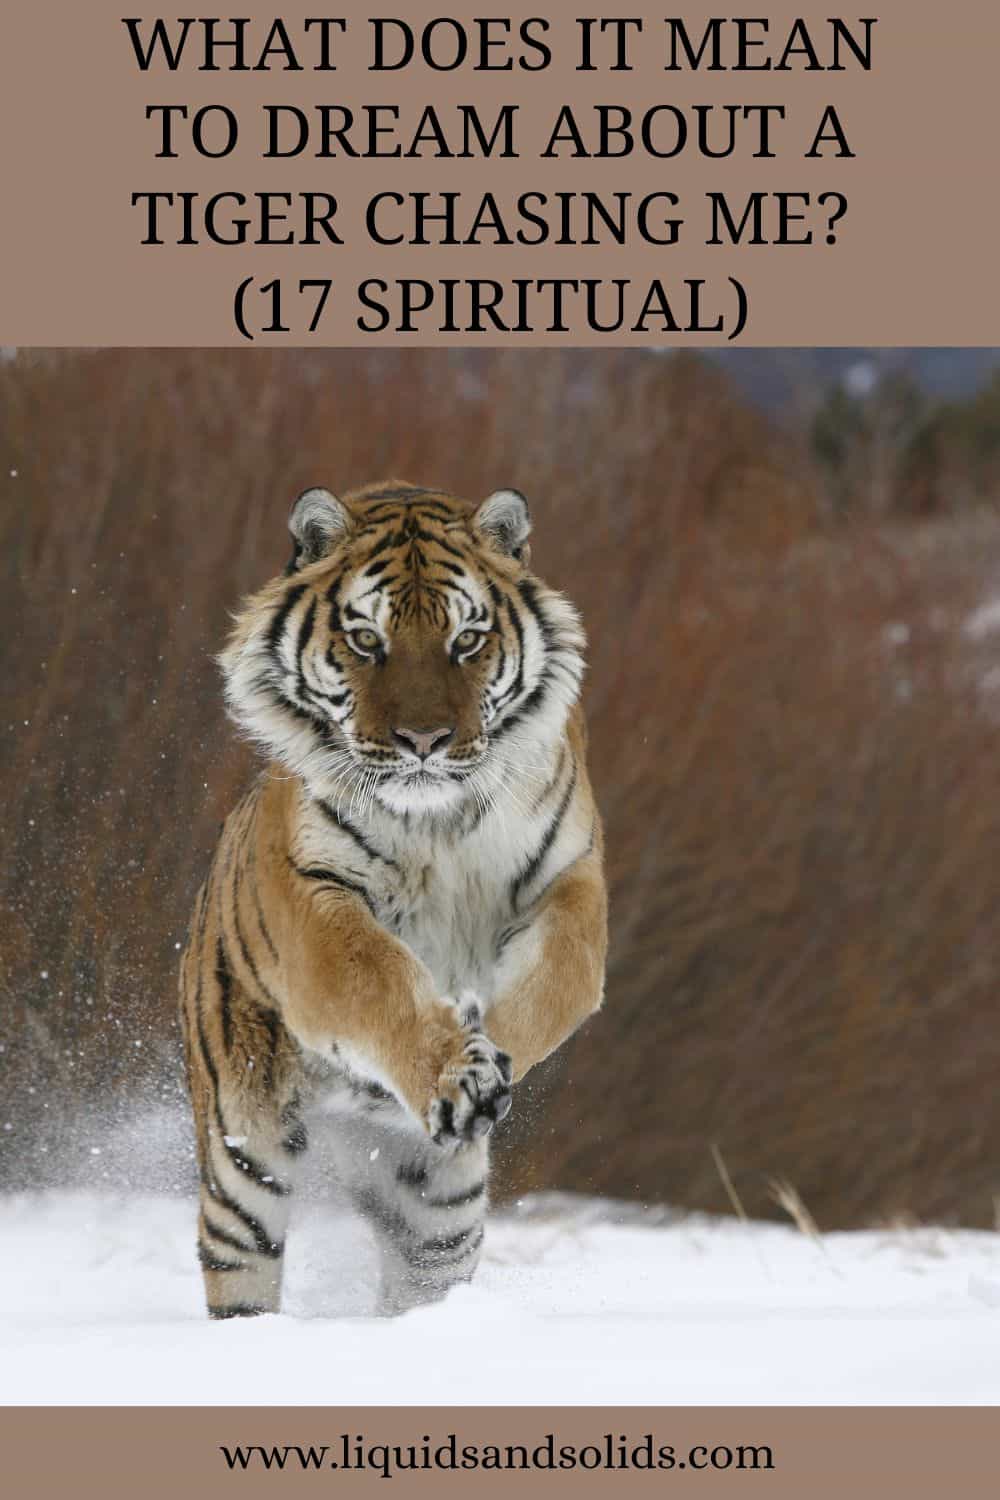 What Does It Mean To Dream About A Tiger Chasing Me? (17 Spiritual) 